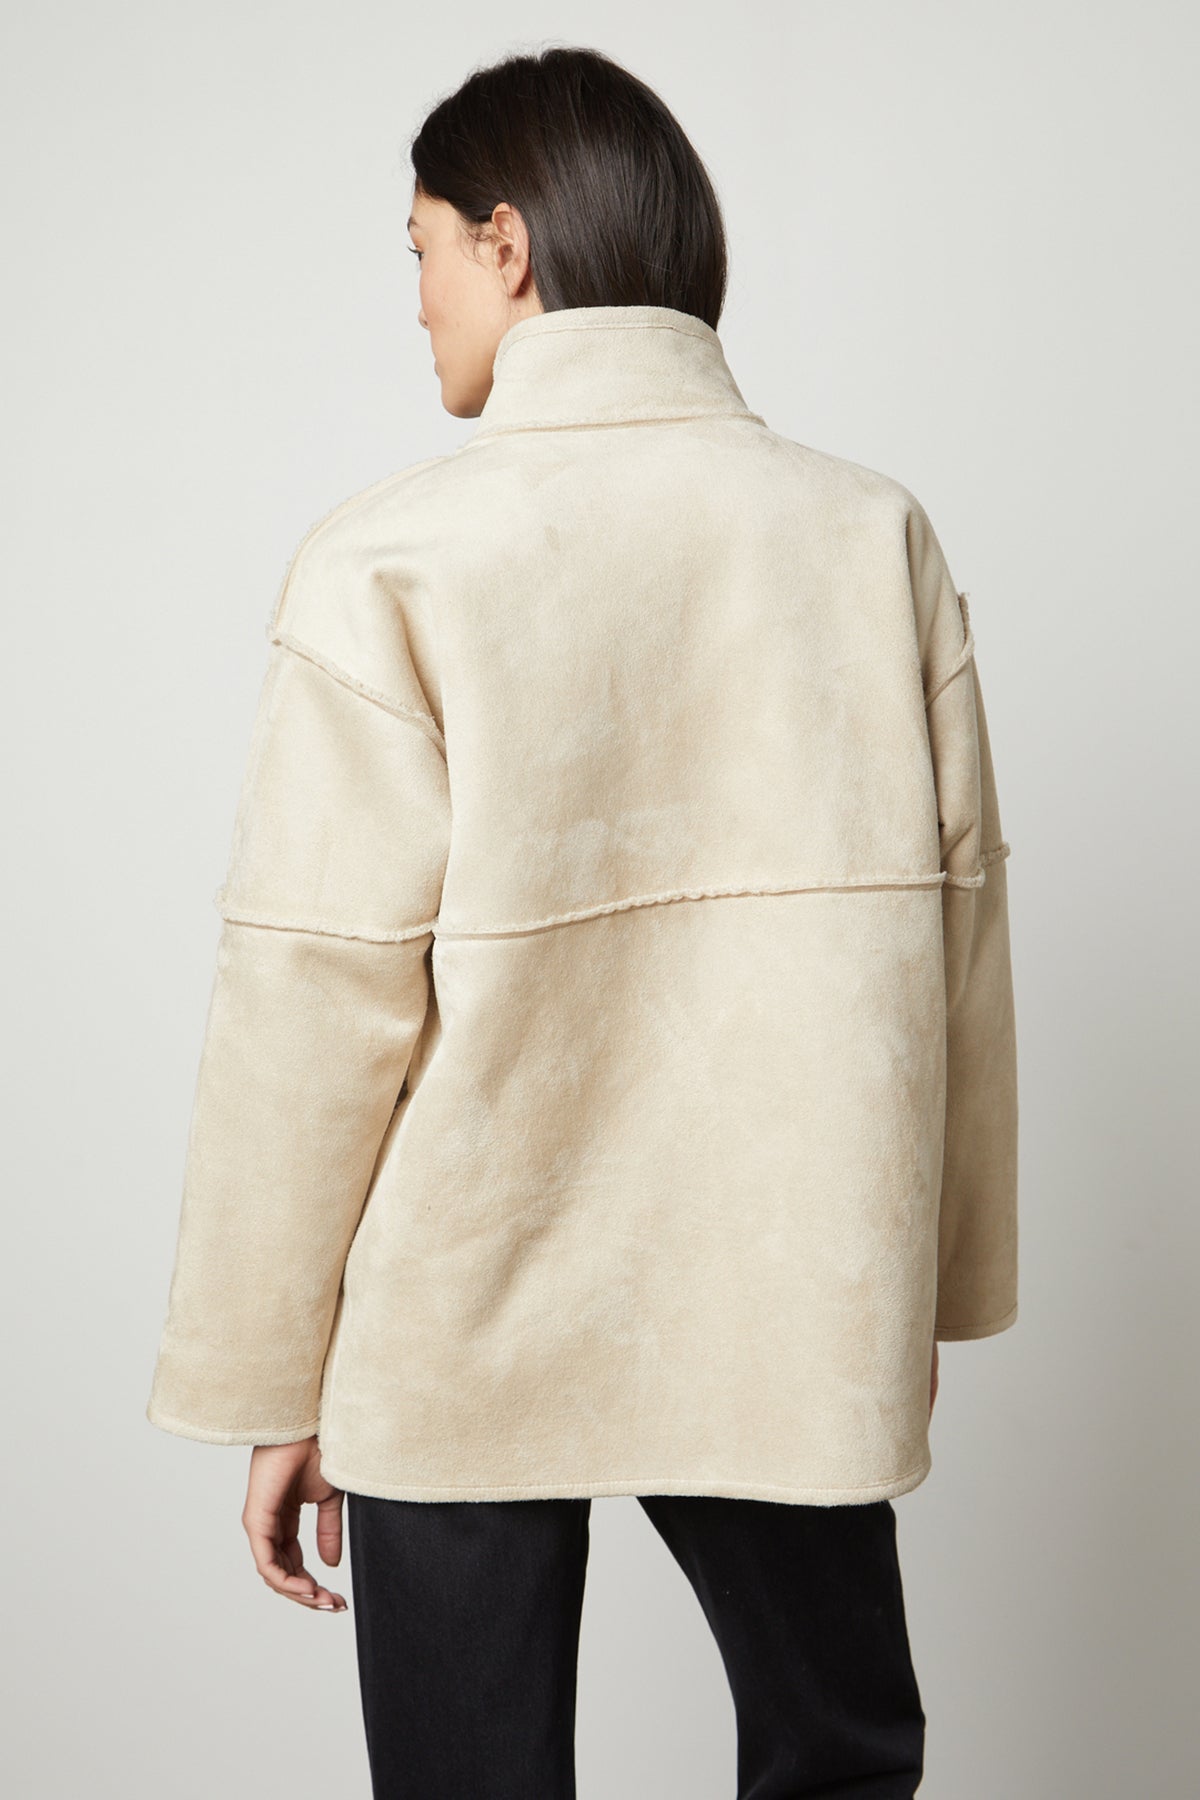 The back view of a woman wearing an ALBANY LUX SHERPA REVERSIBLE JACKET made by Velvet by Graham & Spencer.-35782611173569